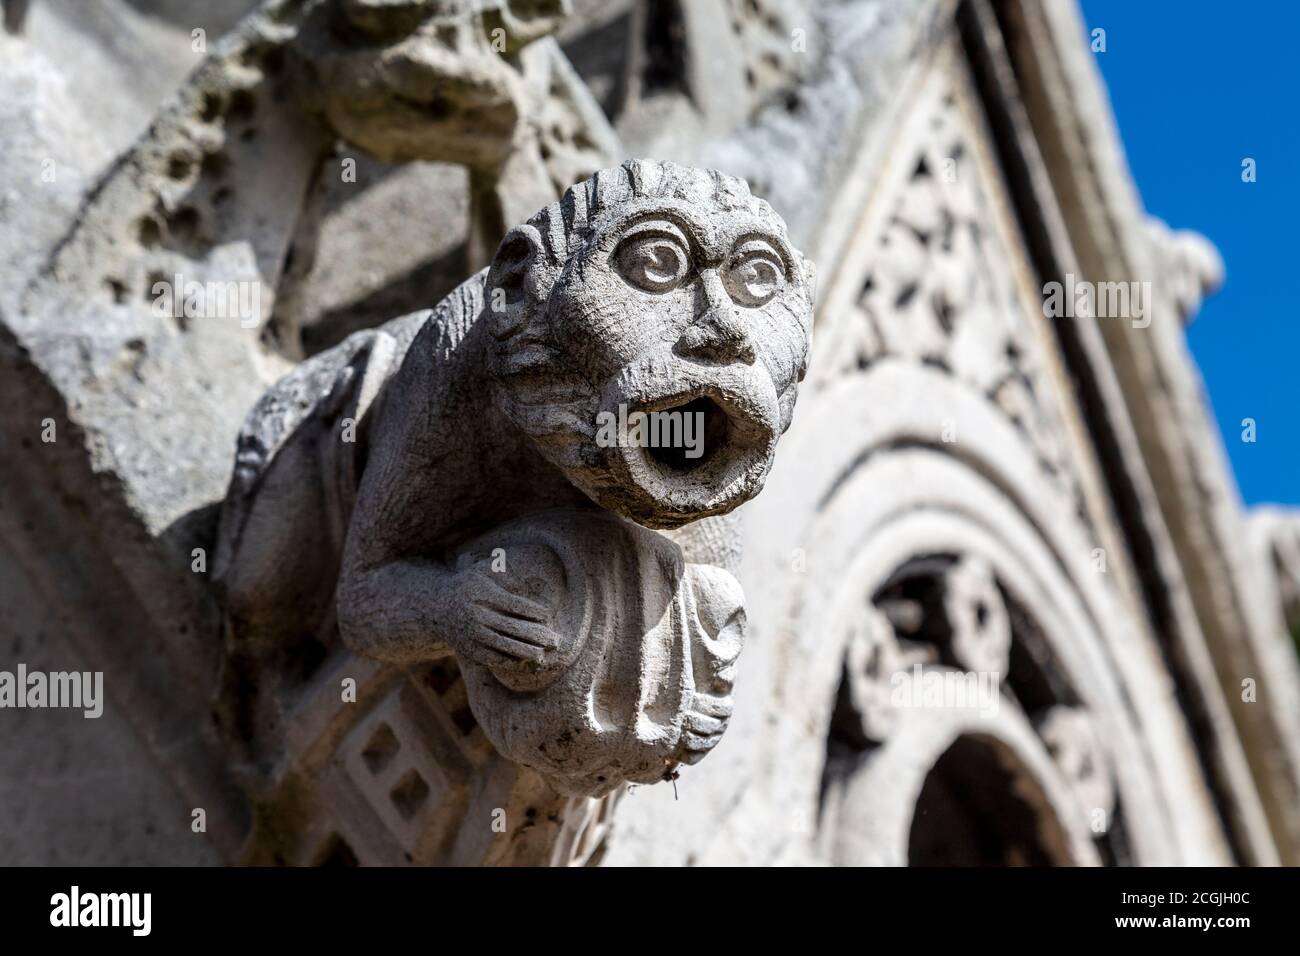 Ornate detail of a monkey on a the tomb of Charles Spencer Ricketts, naval commander under Lord Nelson at Kensal Green Cemetery, London, UK Stock Photo